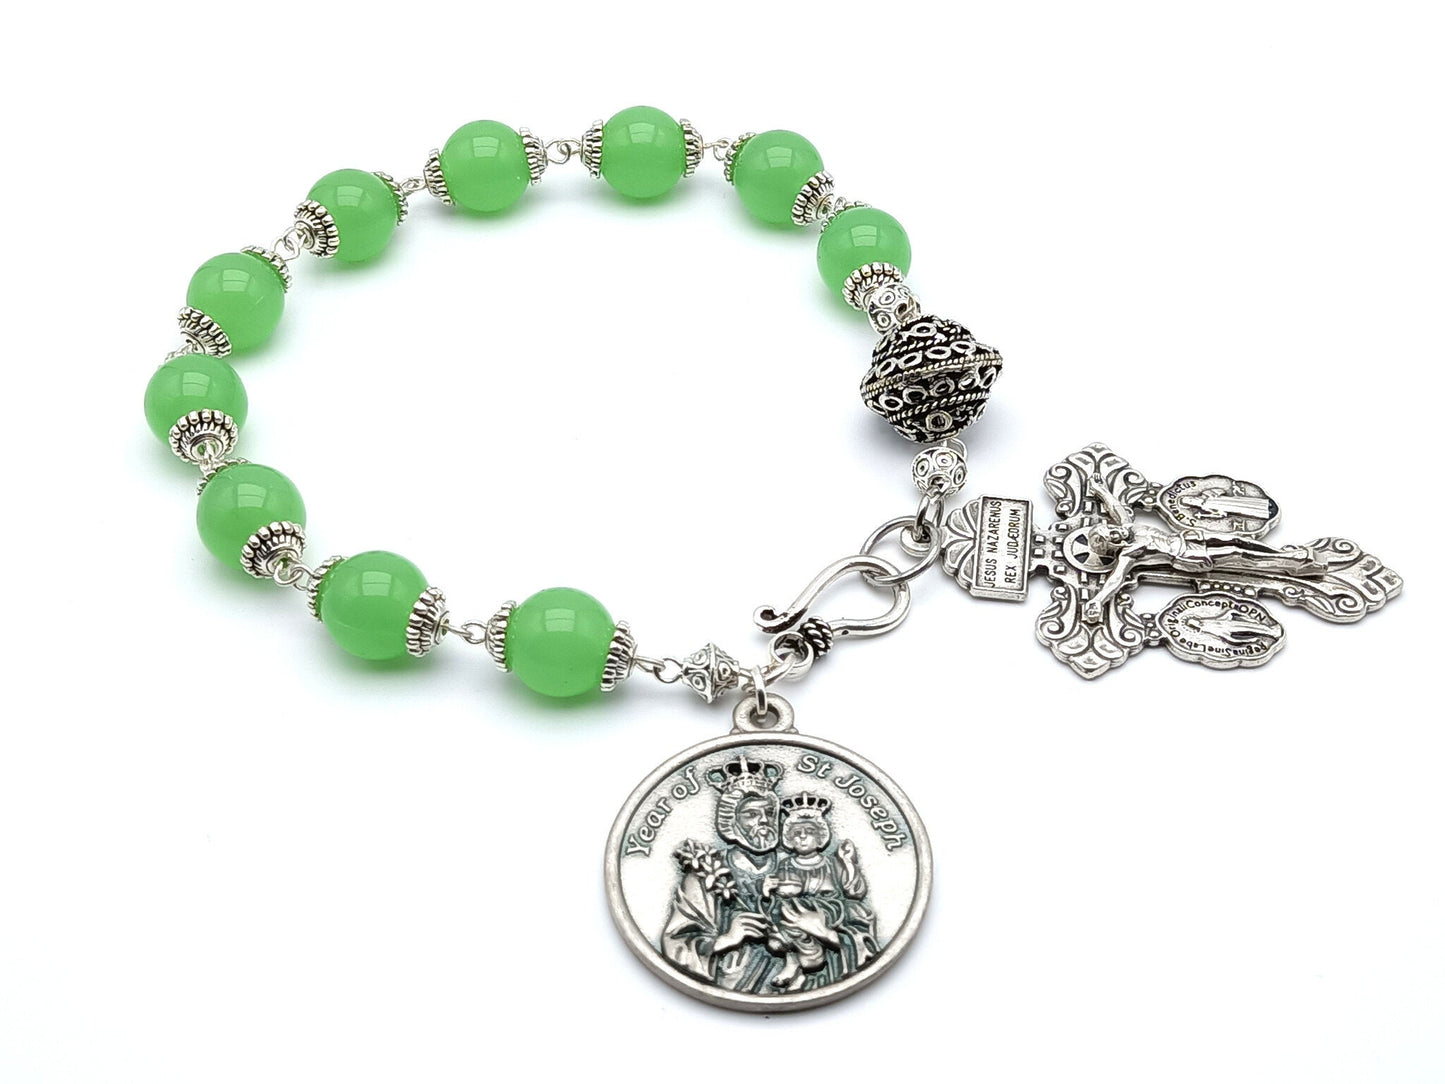 Saint Joseph unique rosary beads single decade or tenner rosary with green glass beads, silver bead caps, pater bead, pardon crucifix and Year of Saint Joseph medal.